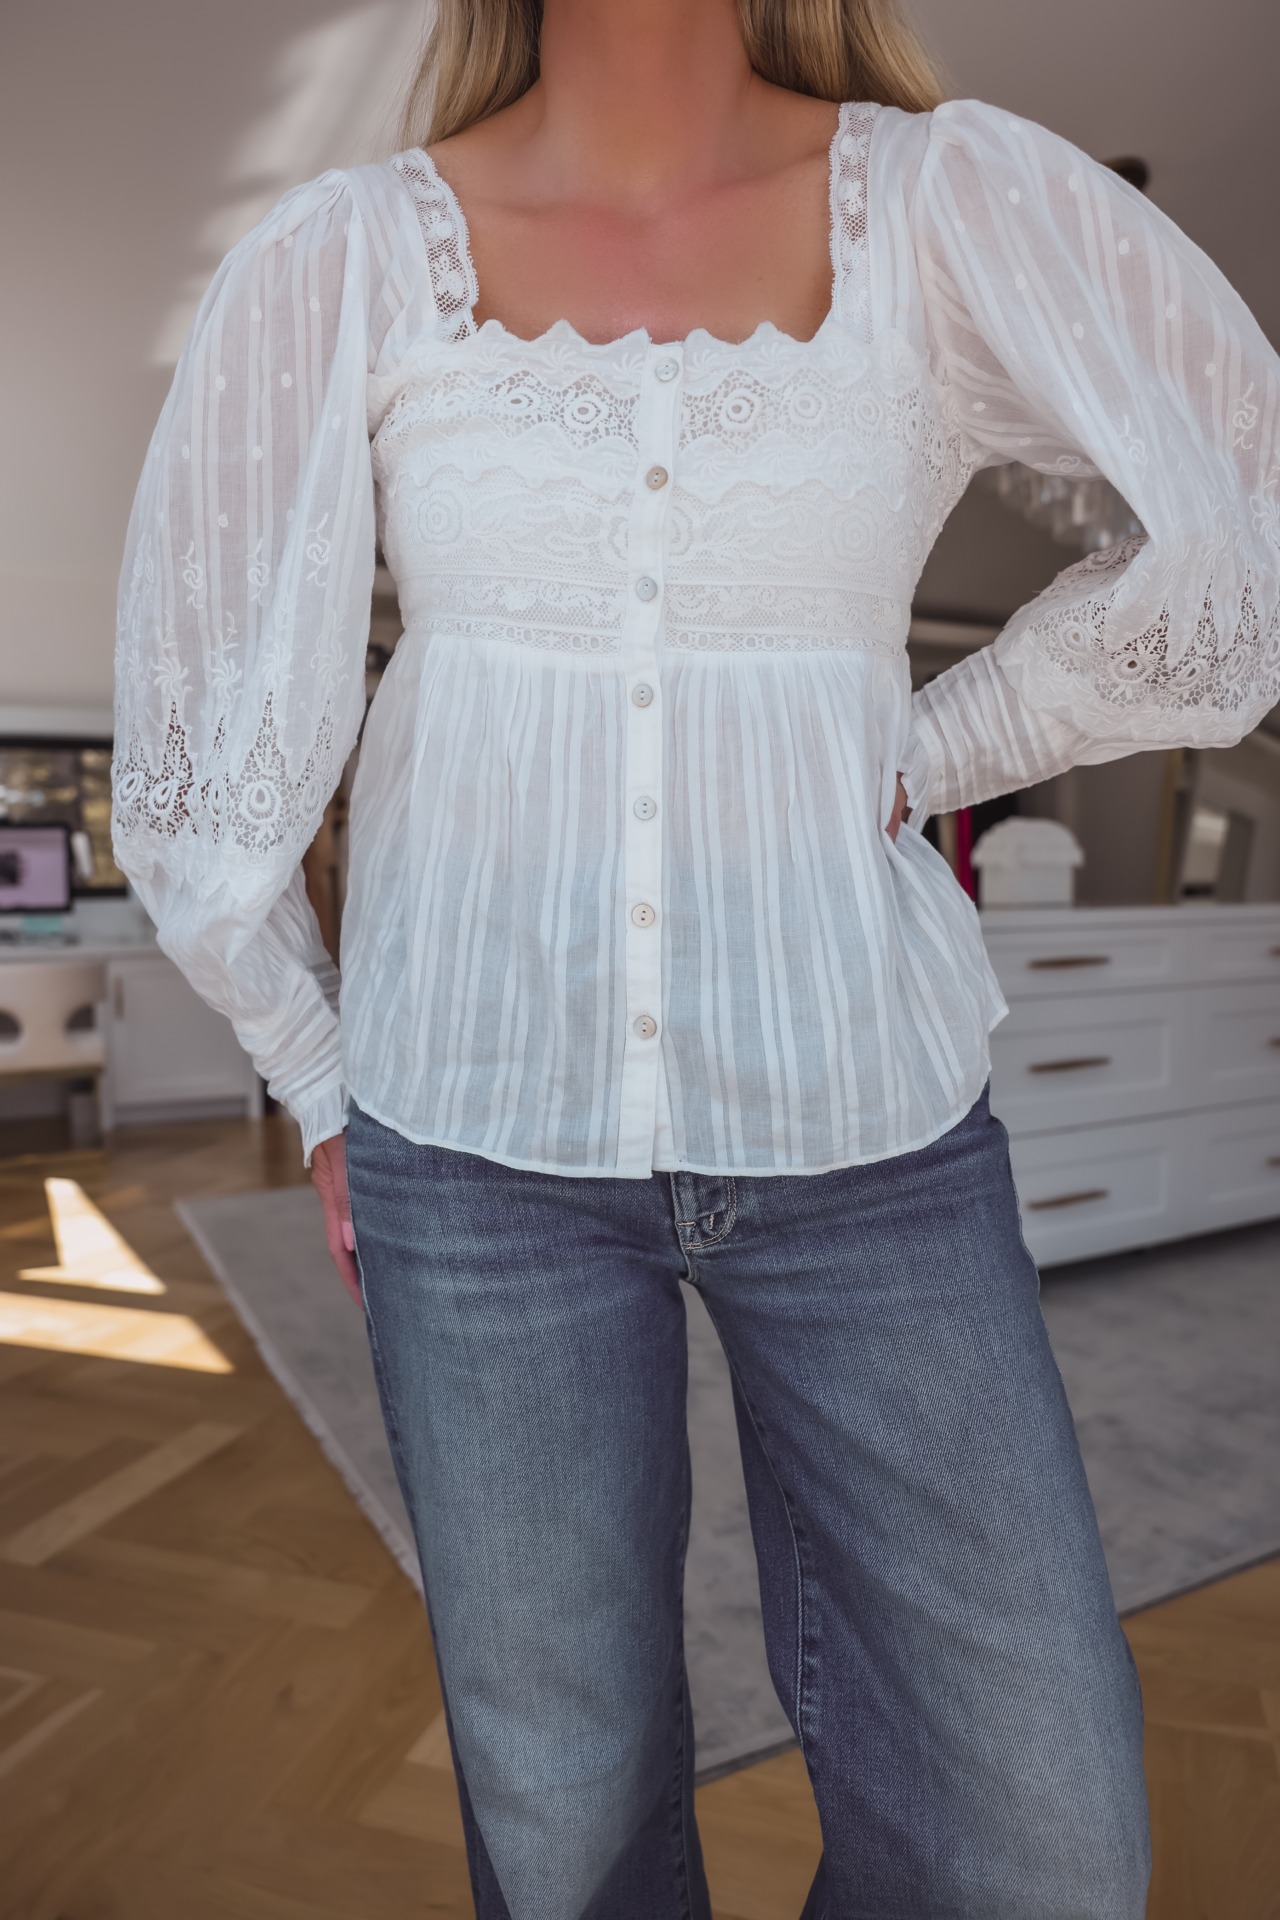 white lace blouse | Tops That Make You Look Slimmer